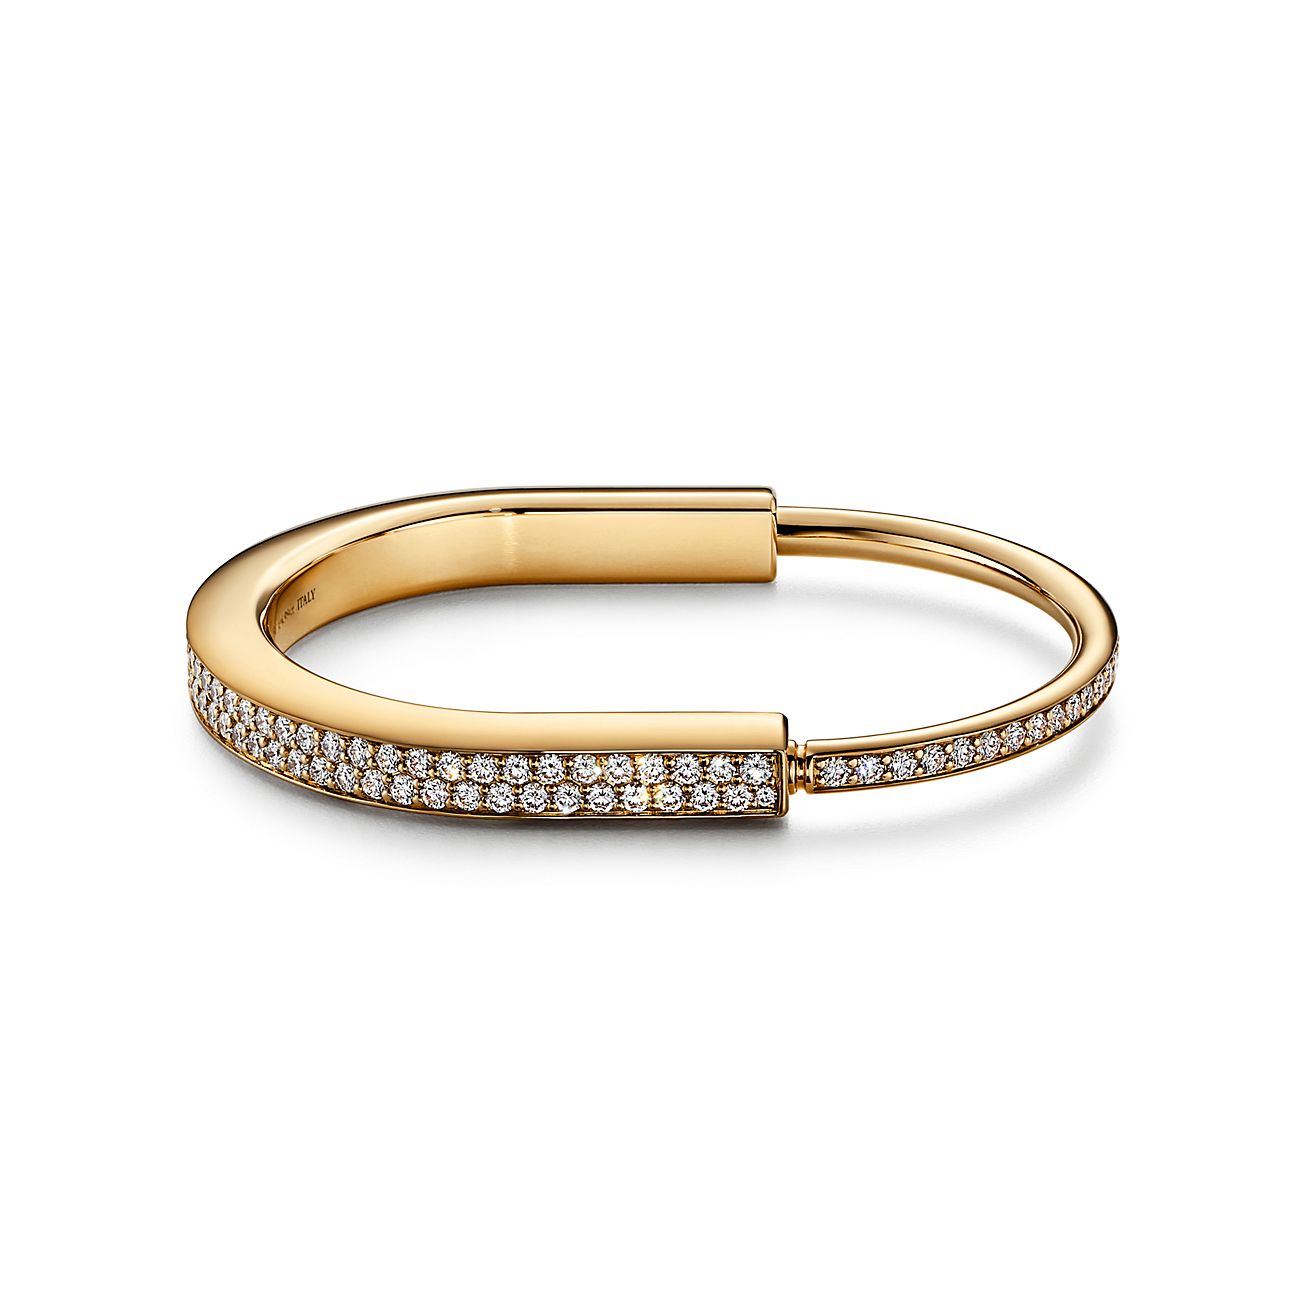 Tiffany and Co. 'Atlas' Diamond and Rose Gold Bracelet at 1stDibs